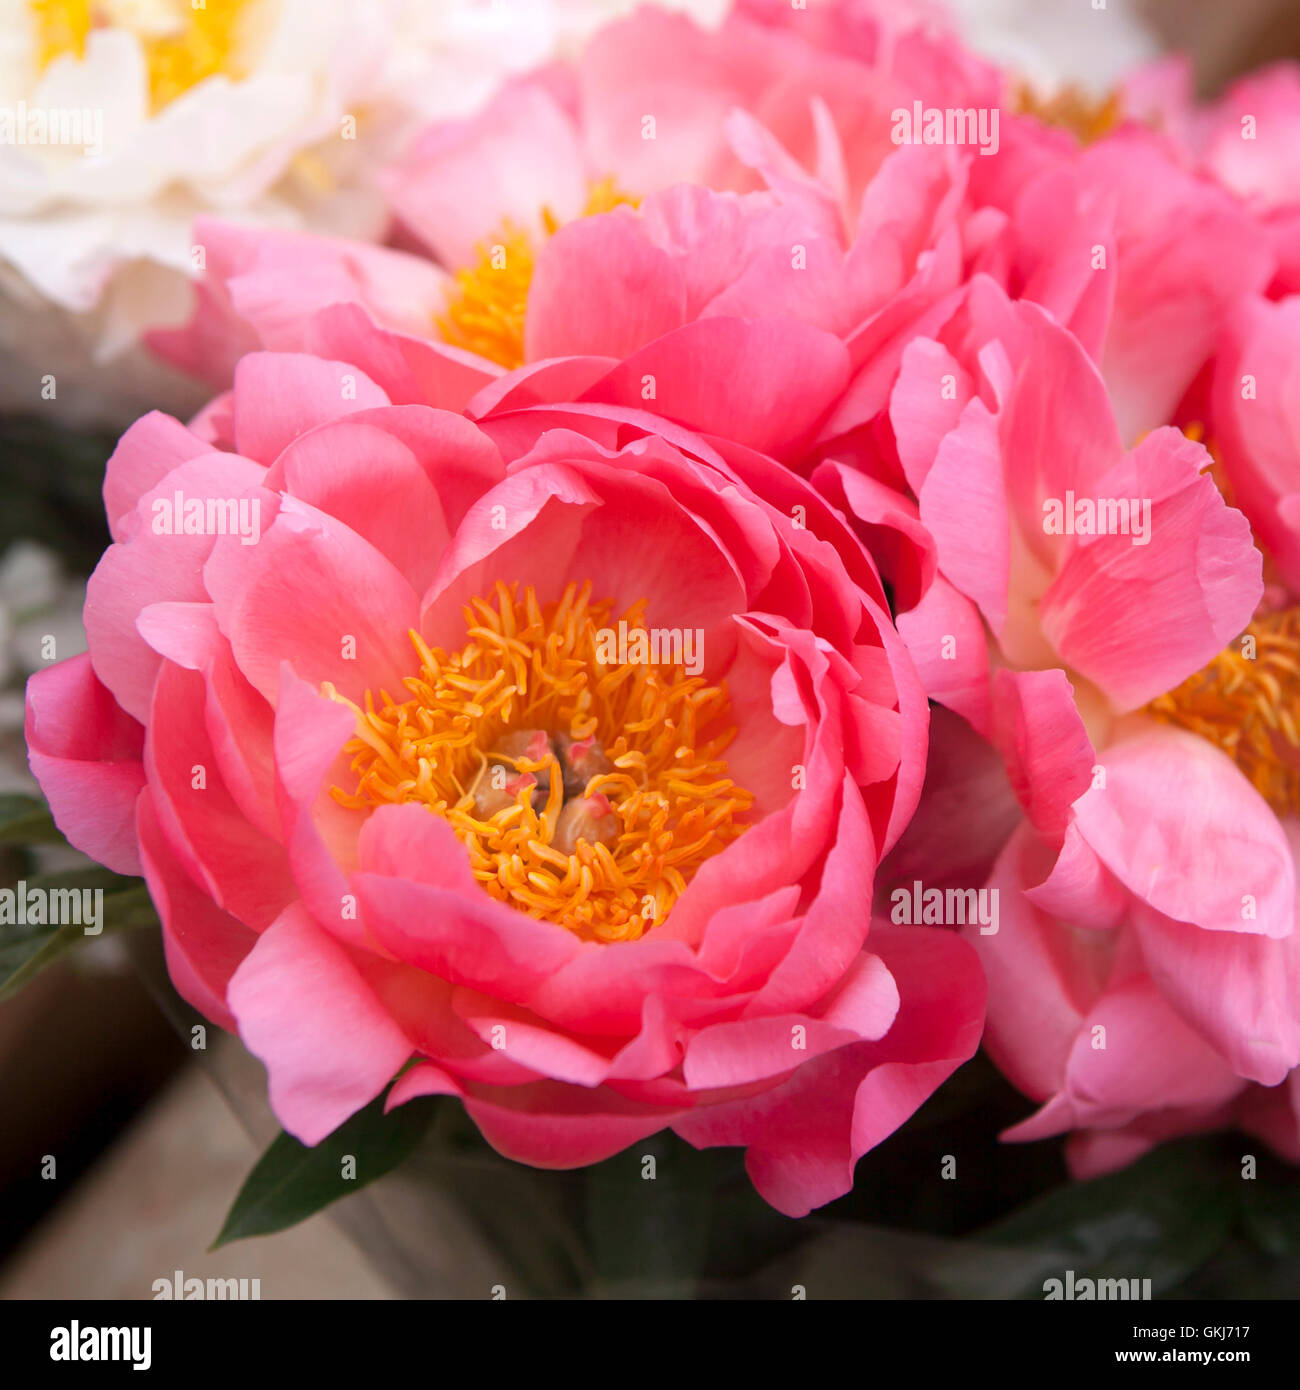 Freshly picked bouquet of peony flowers on display at the farmers market Stock Photo